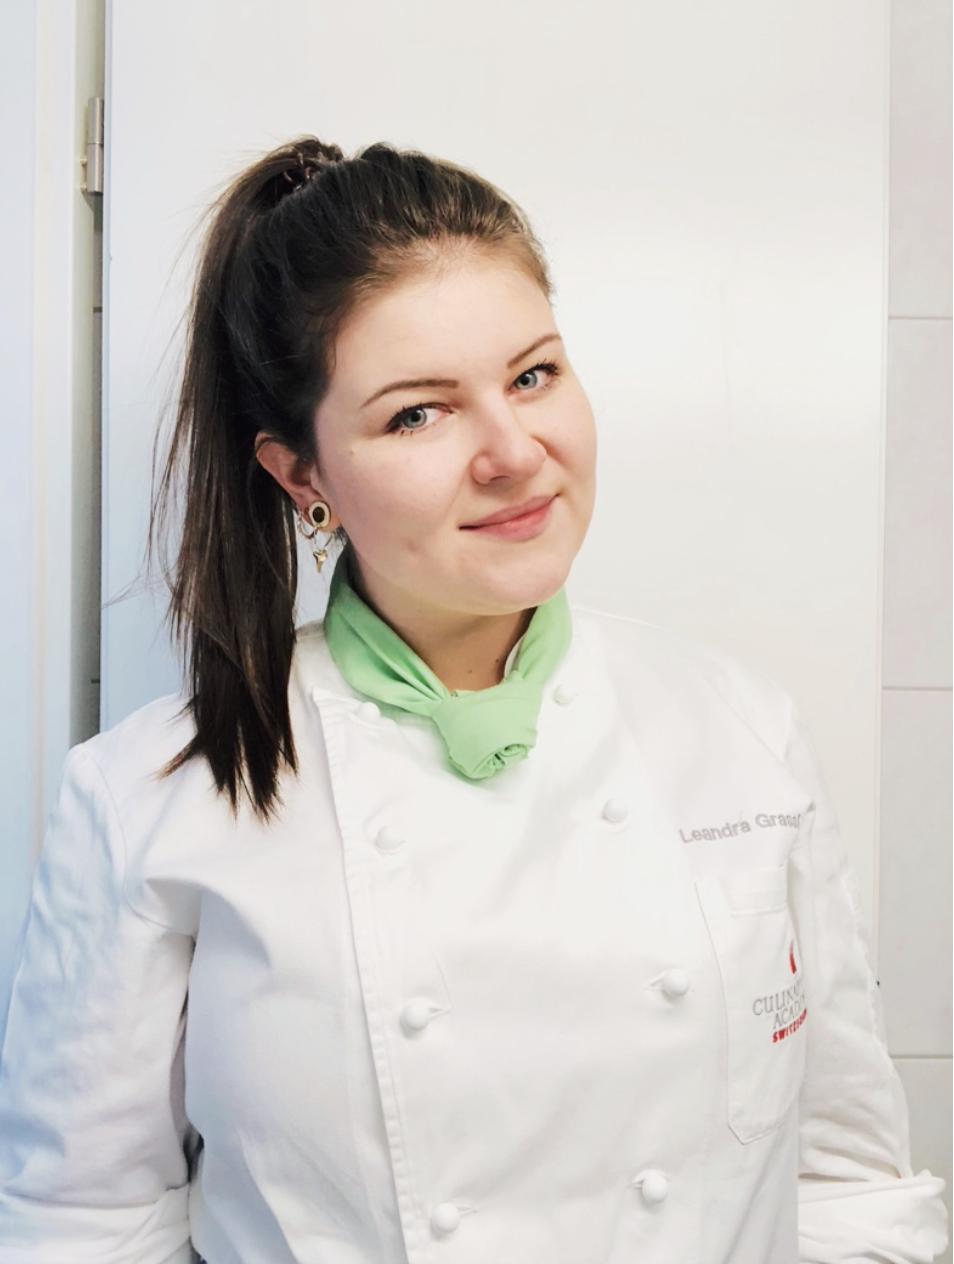 Swiss Grand Diploma – a Roadmap to a New Career. Interview with a Sales Rep turned Pastry Chef 3